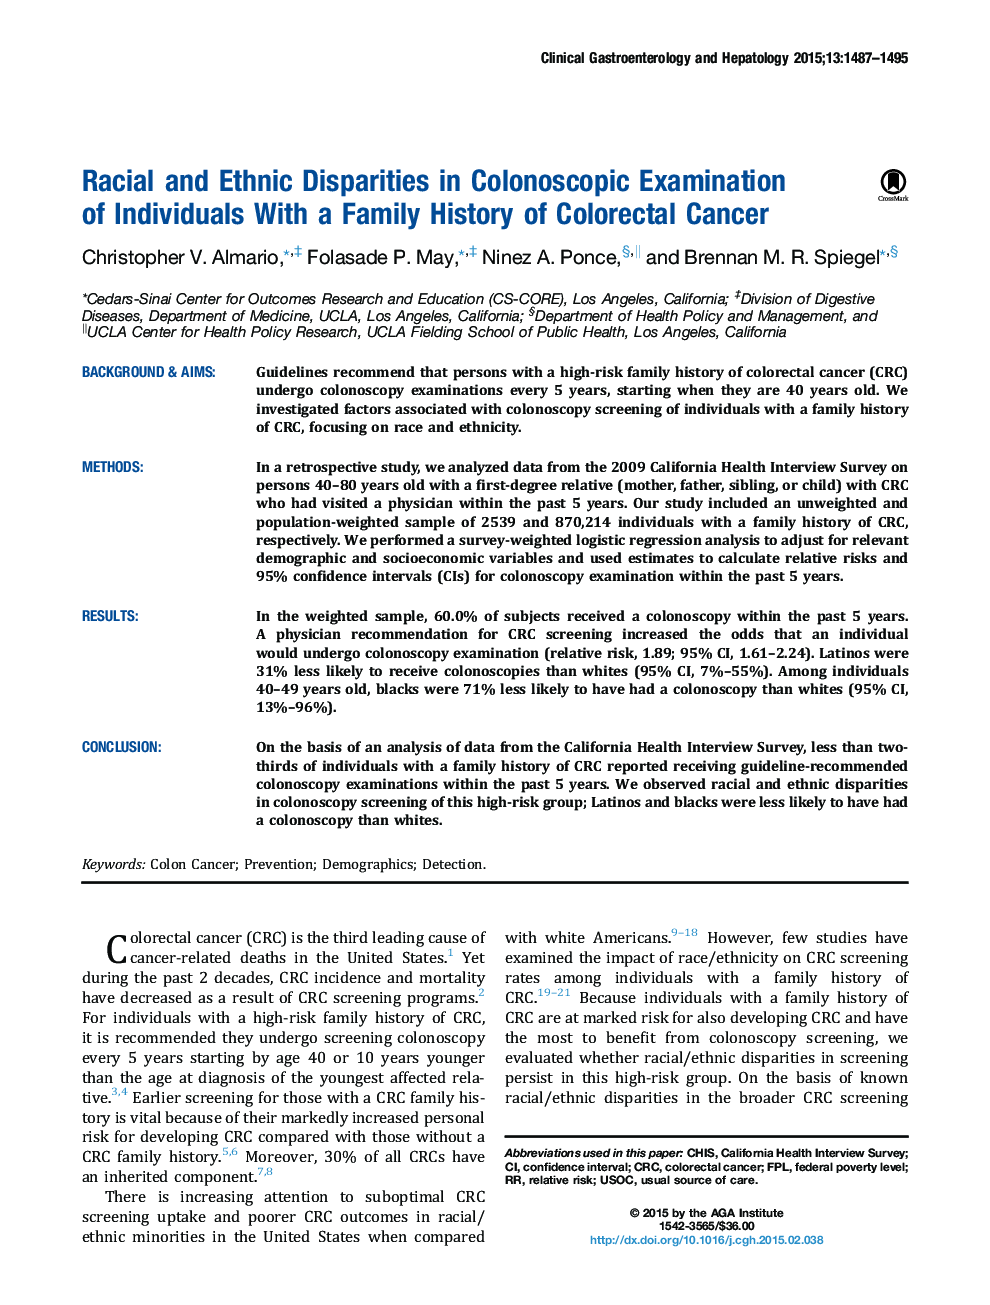 Racial and Ethnic Disparities in Colonoscopic Examination of Individuals With a Family History of Colorectal Cancer